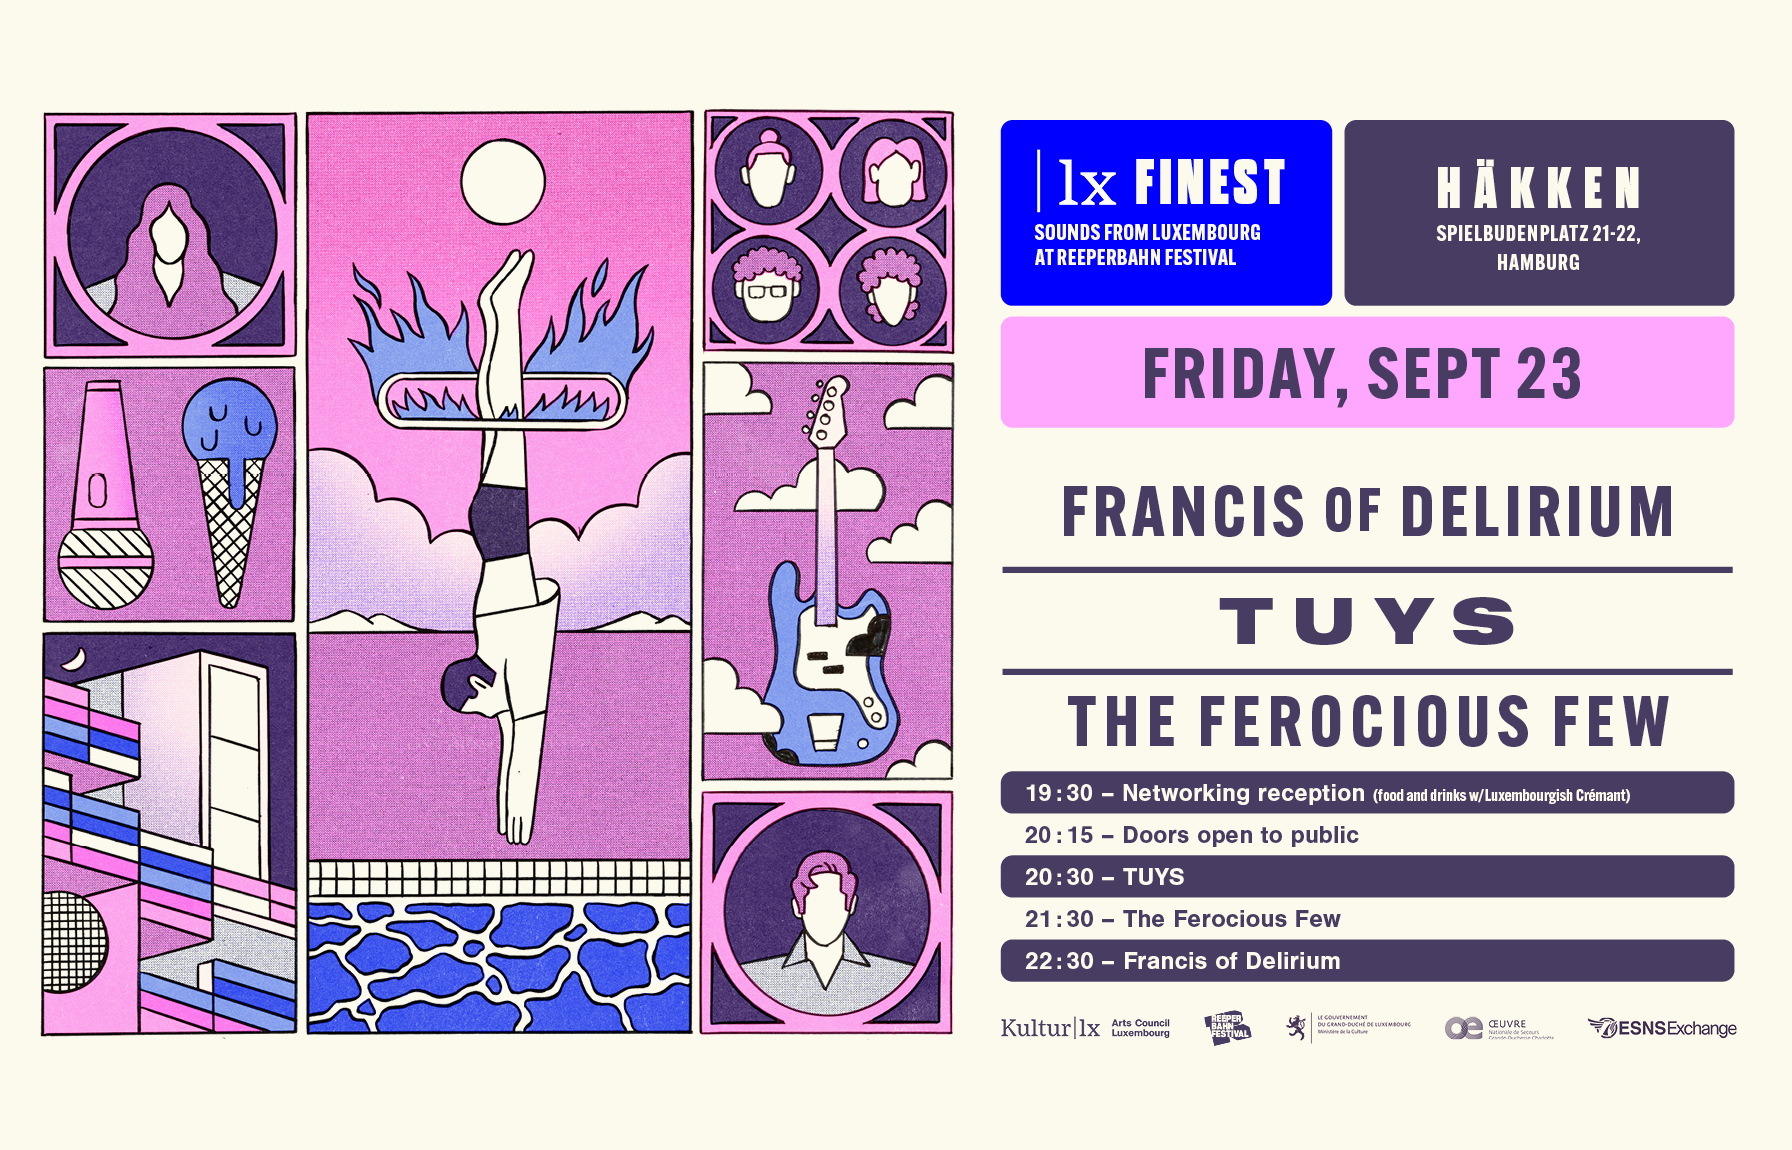 |lx finest - Sounds from Luxembourg at Reeperbahn Festival 2022